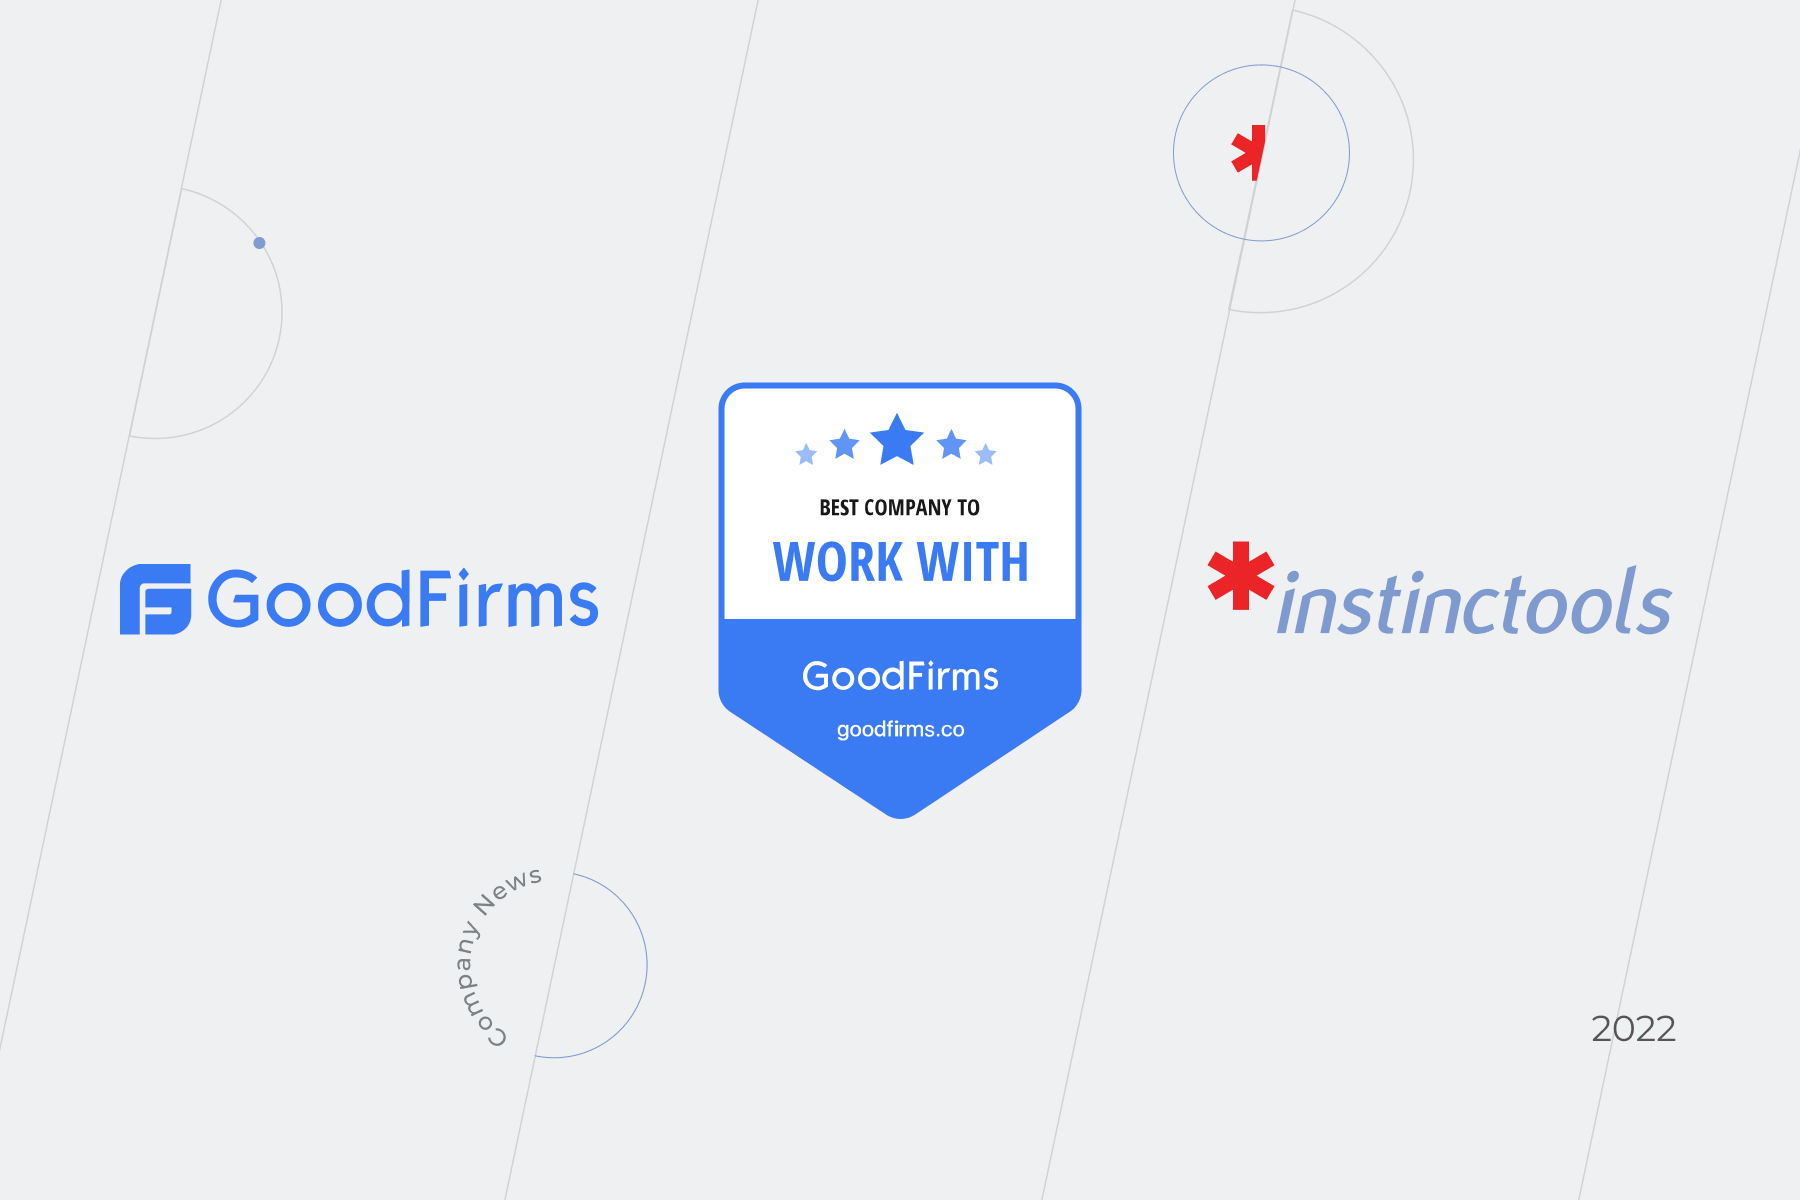 GoodFirms Recognizes *instinctools As the Best Company to Work With